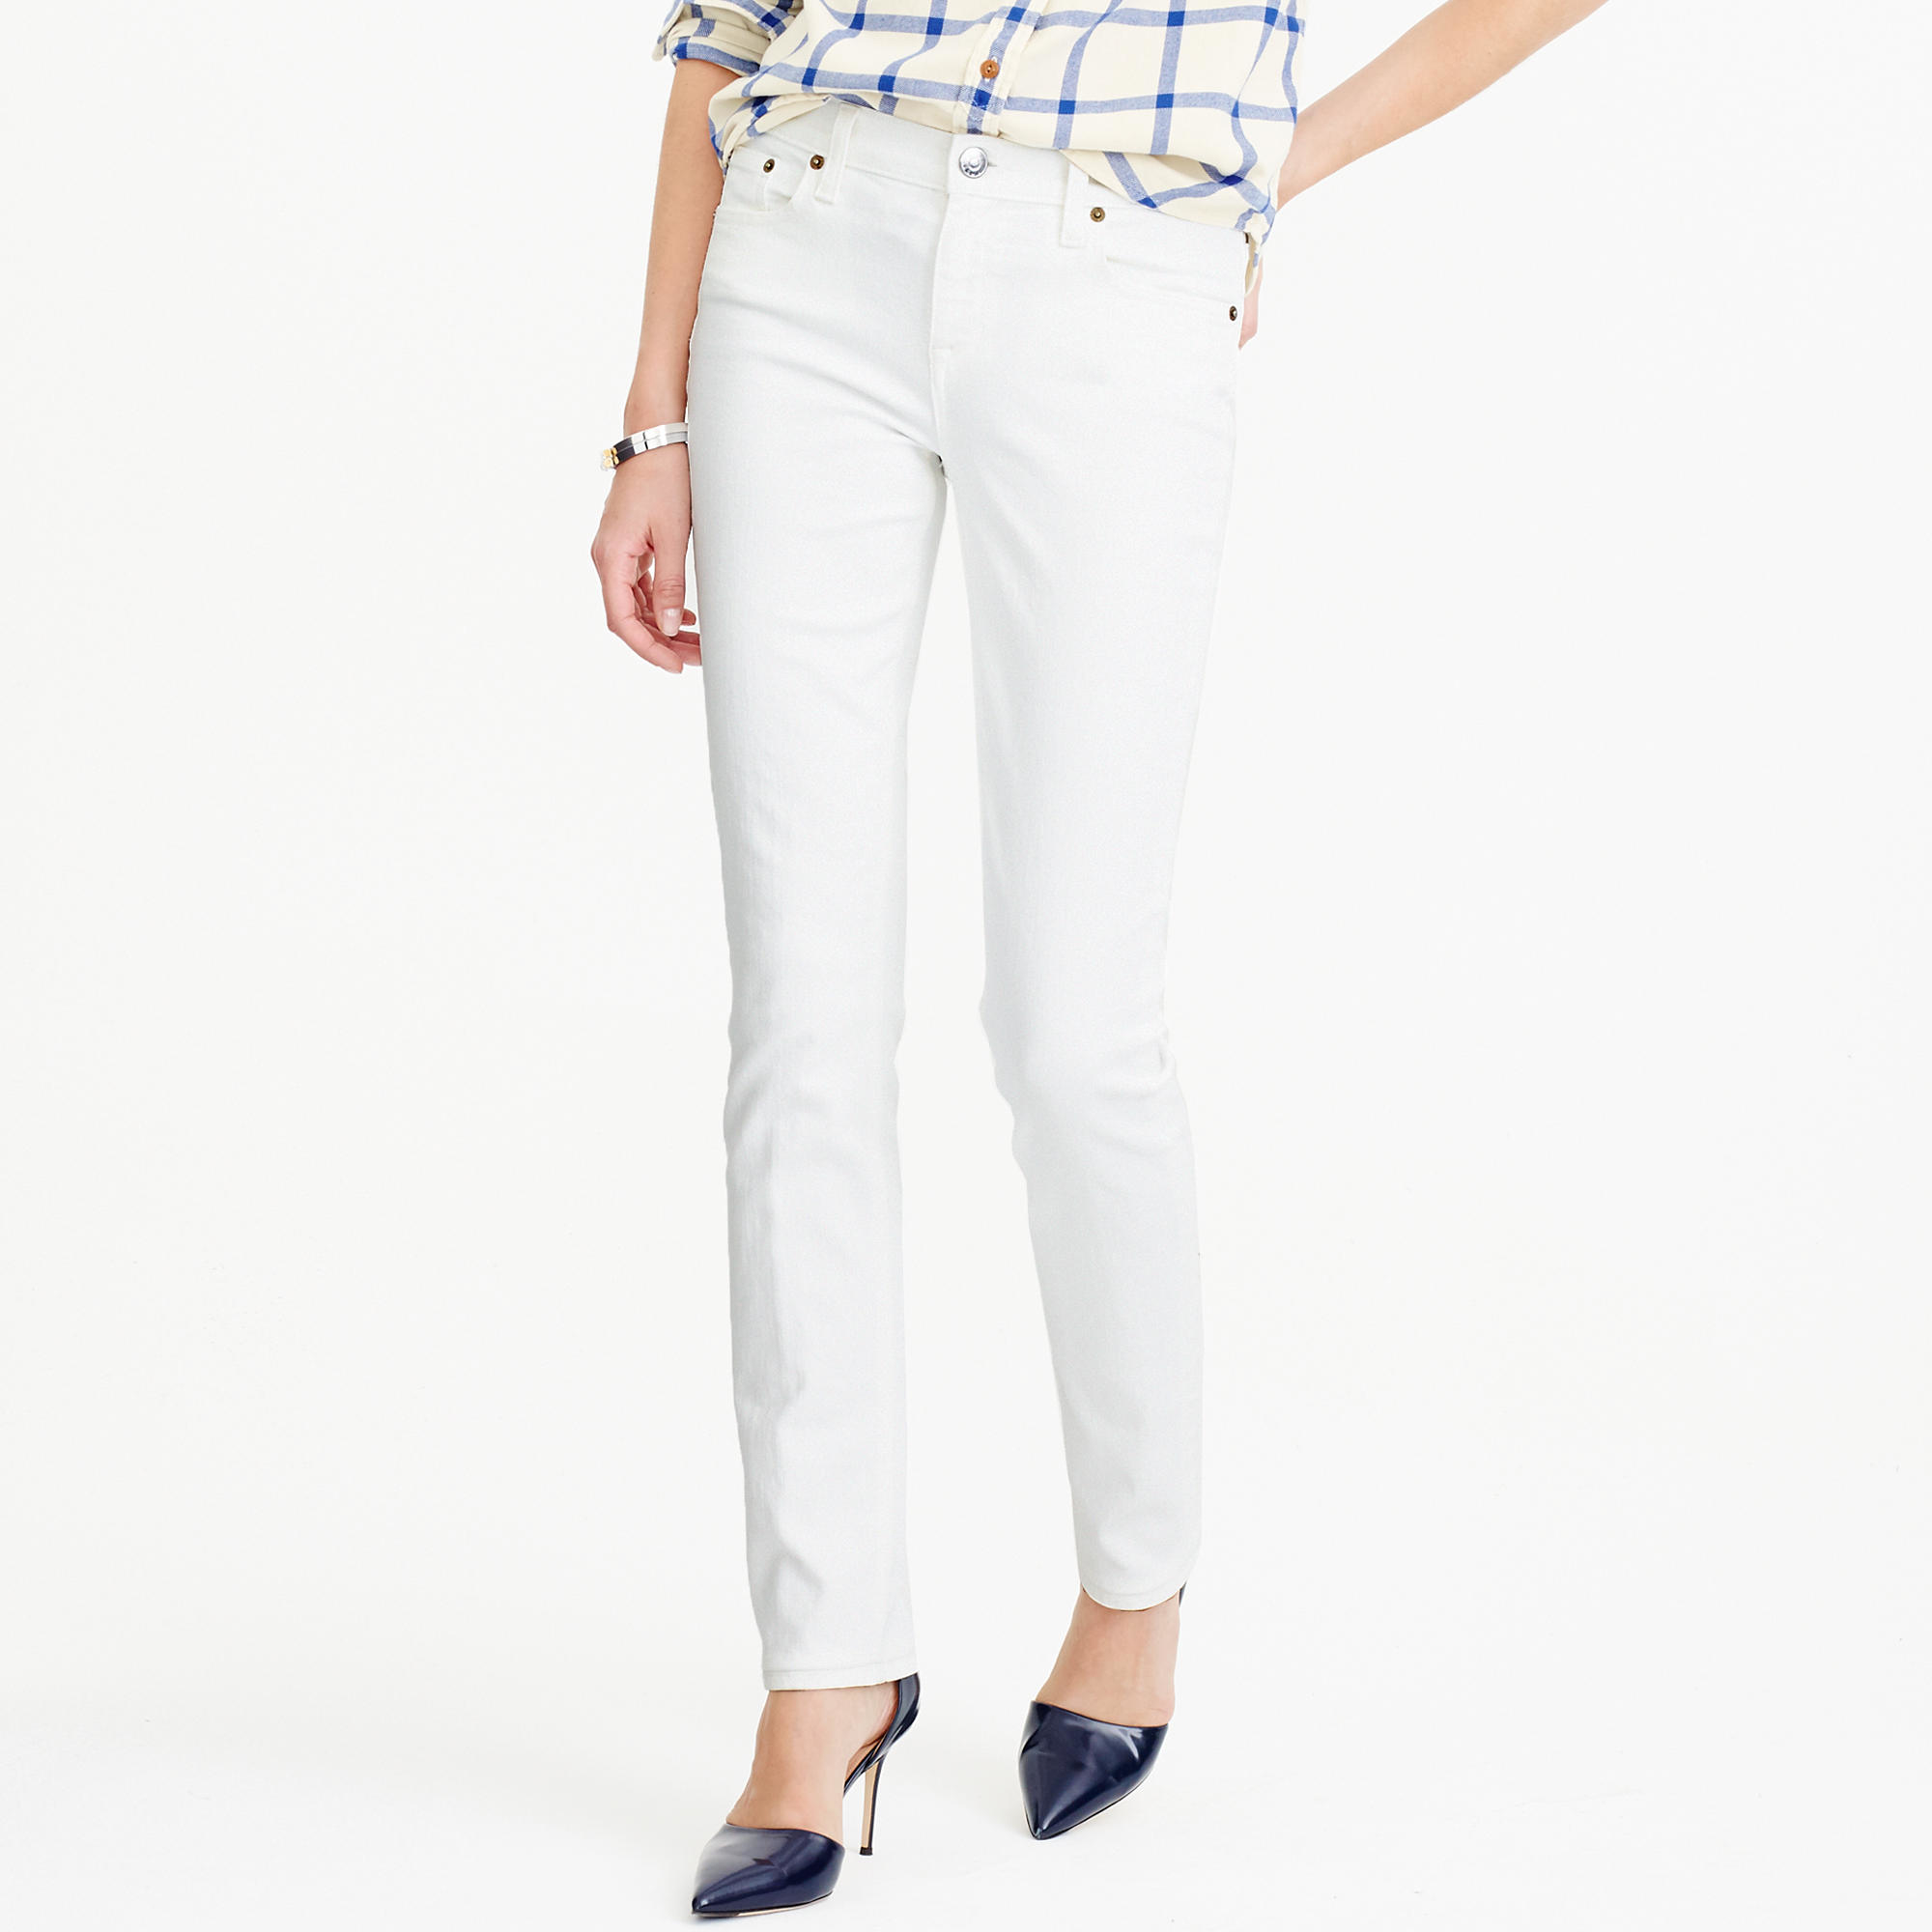 J.crew Petite Matchstick Jean In White in White | Lyst